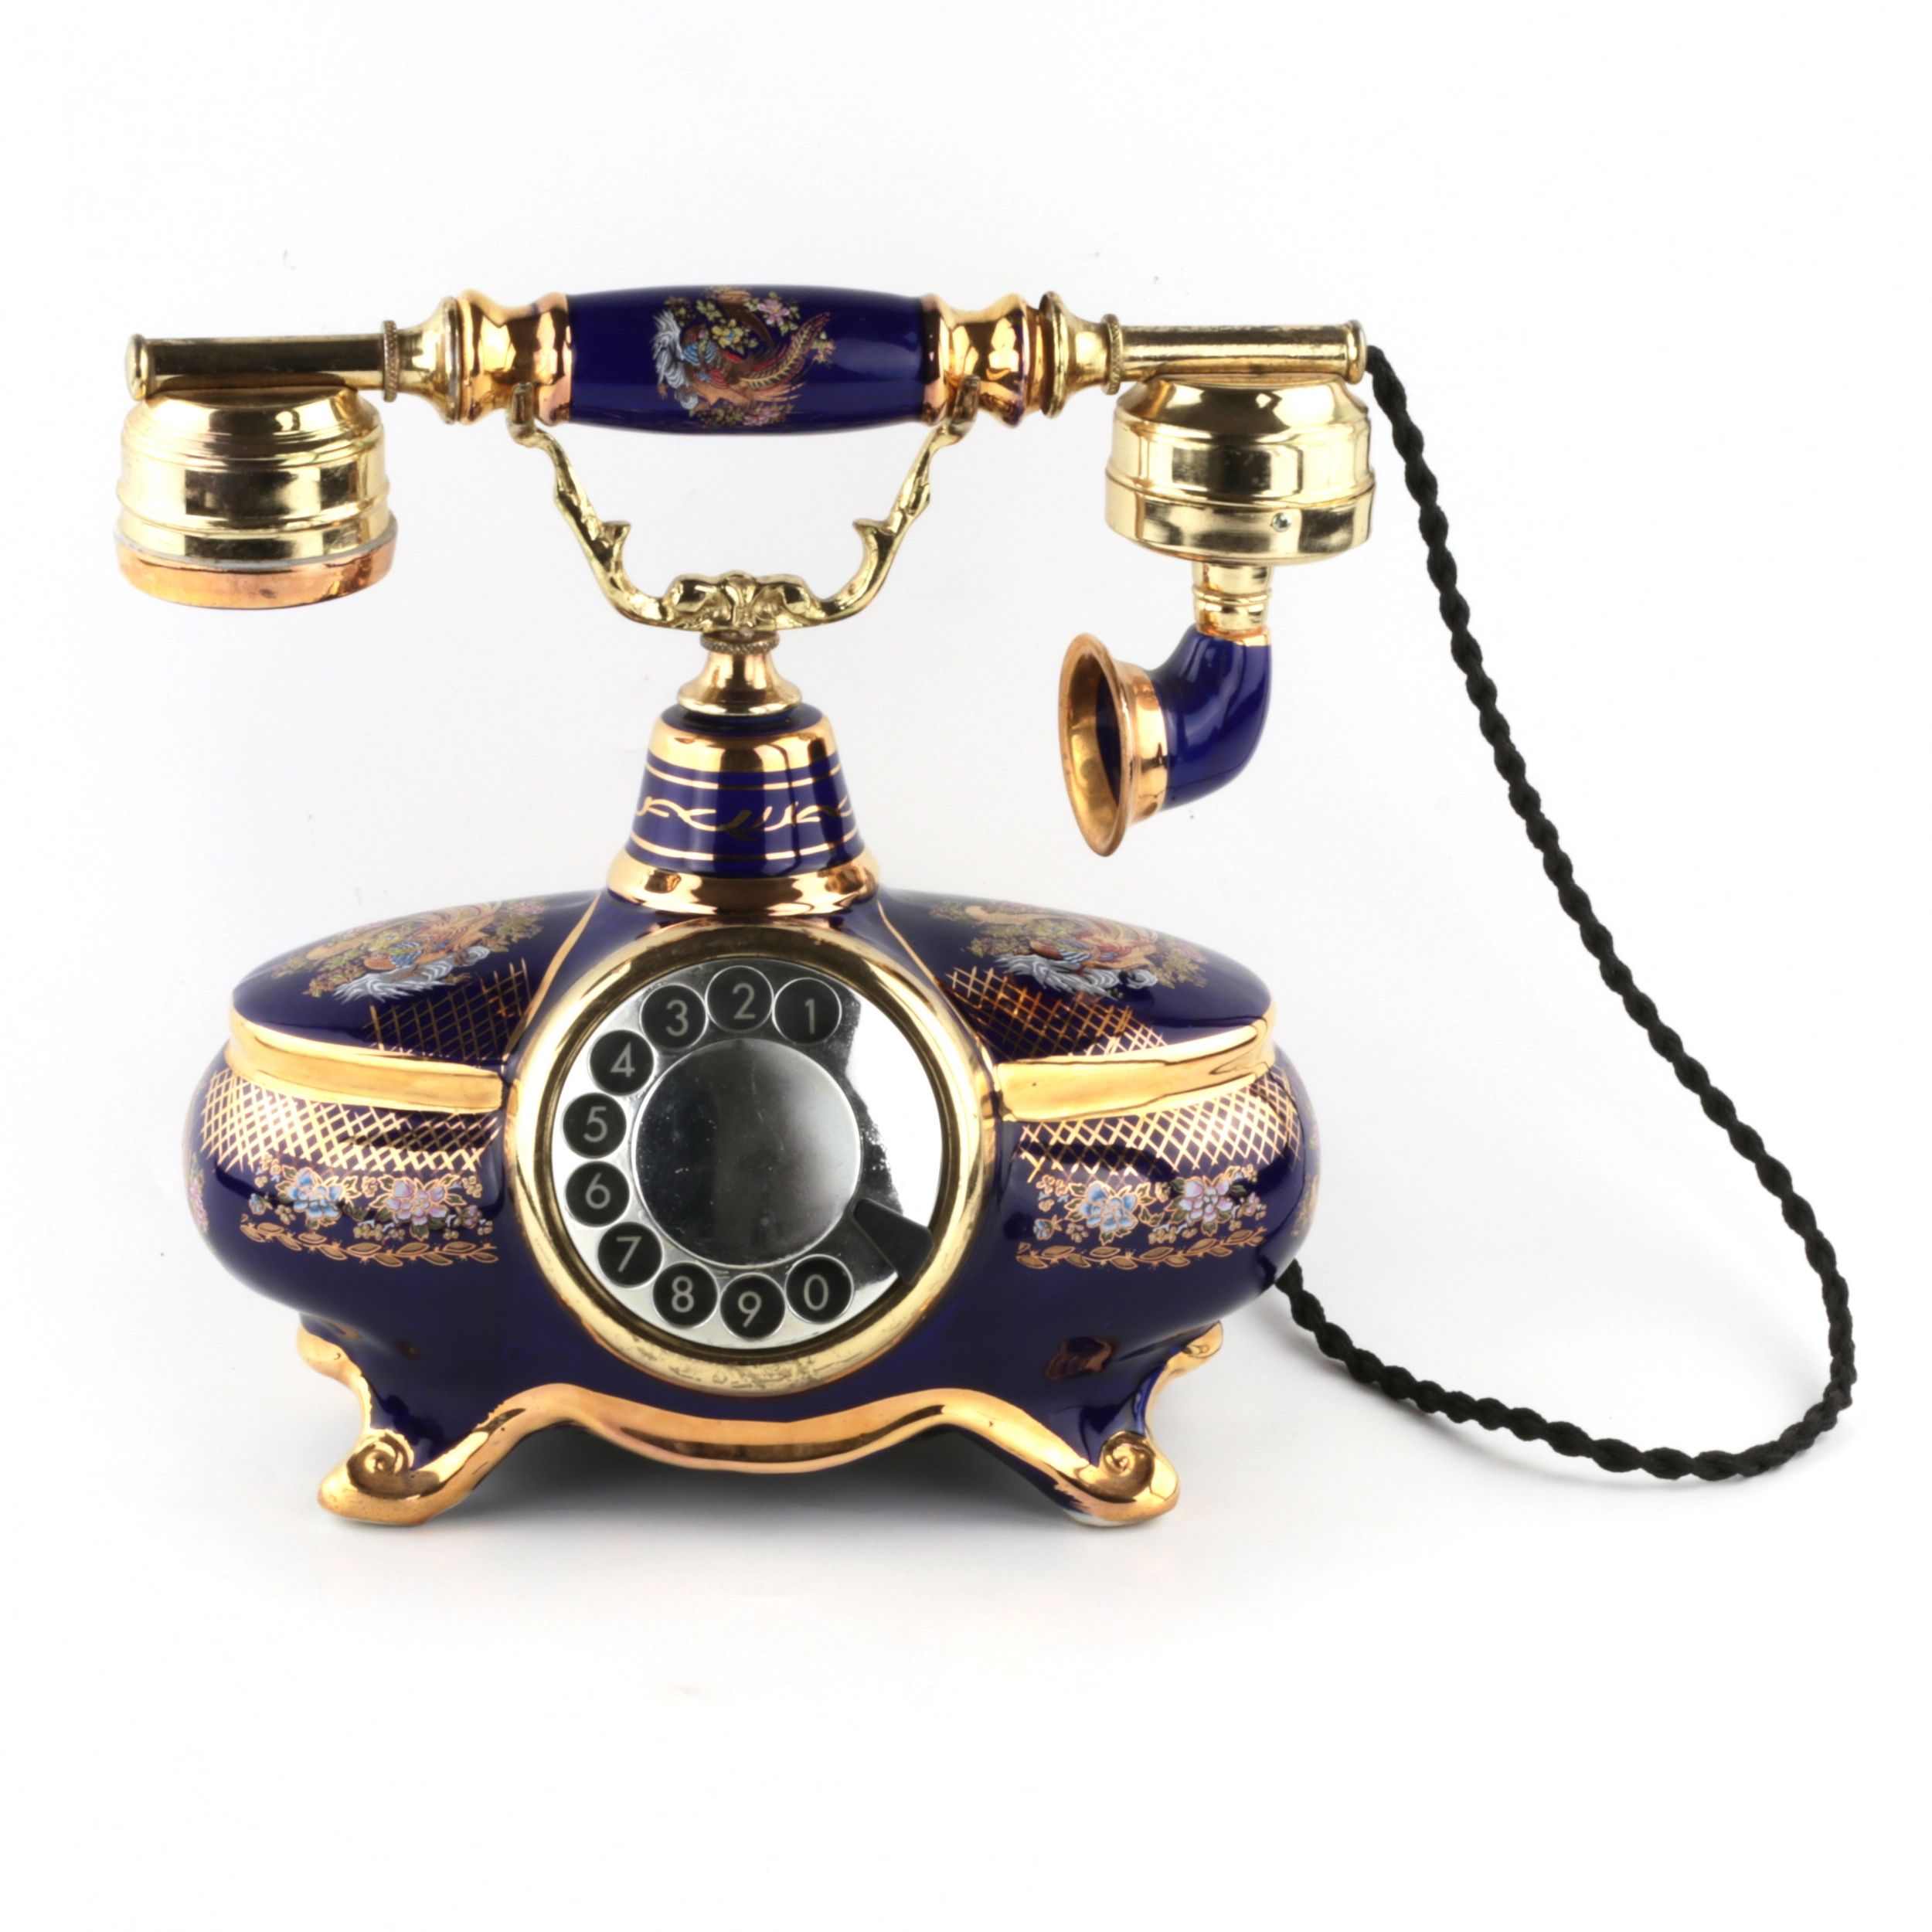 Desktop-telephone-in-the-style-of-Limoges